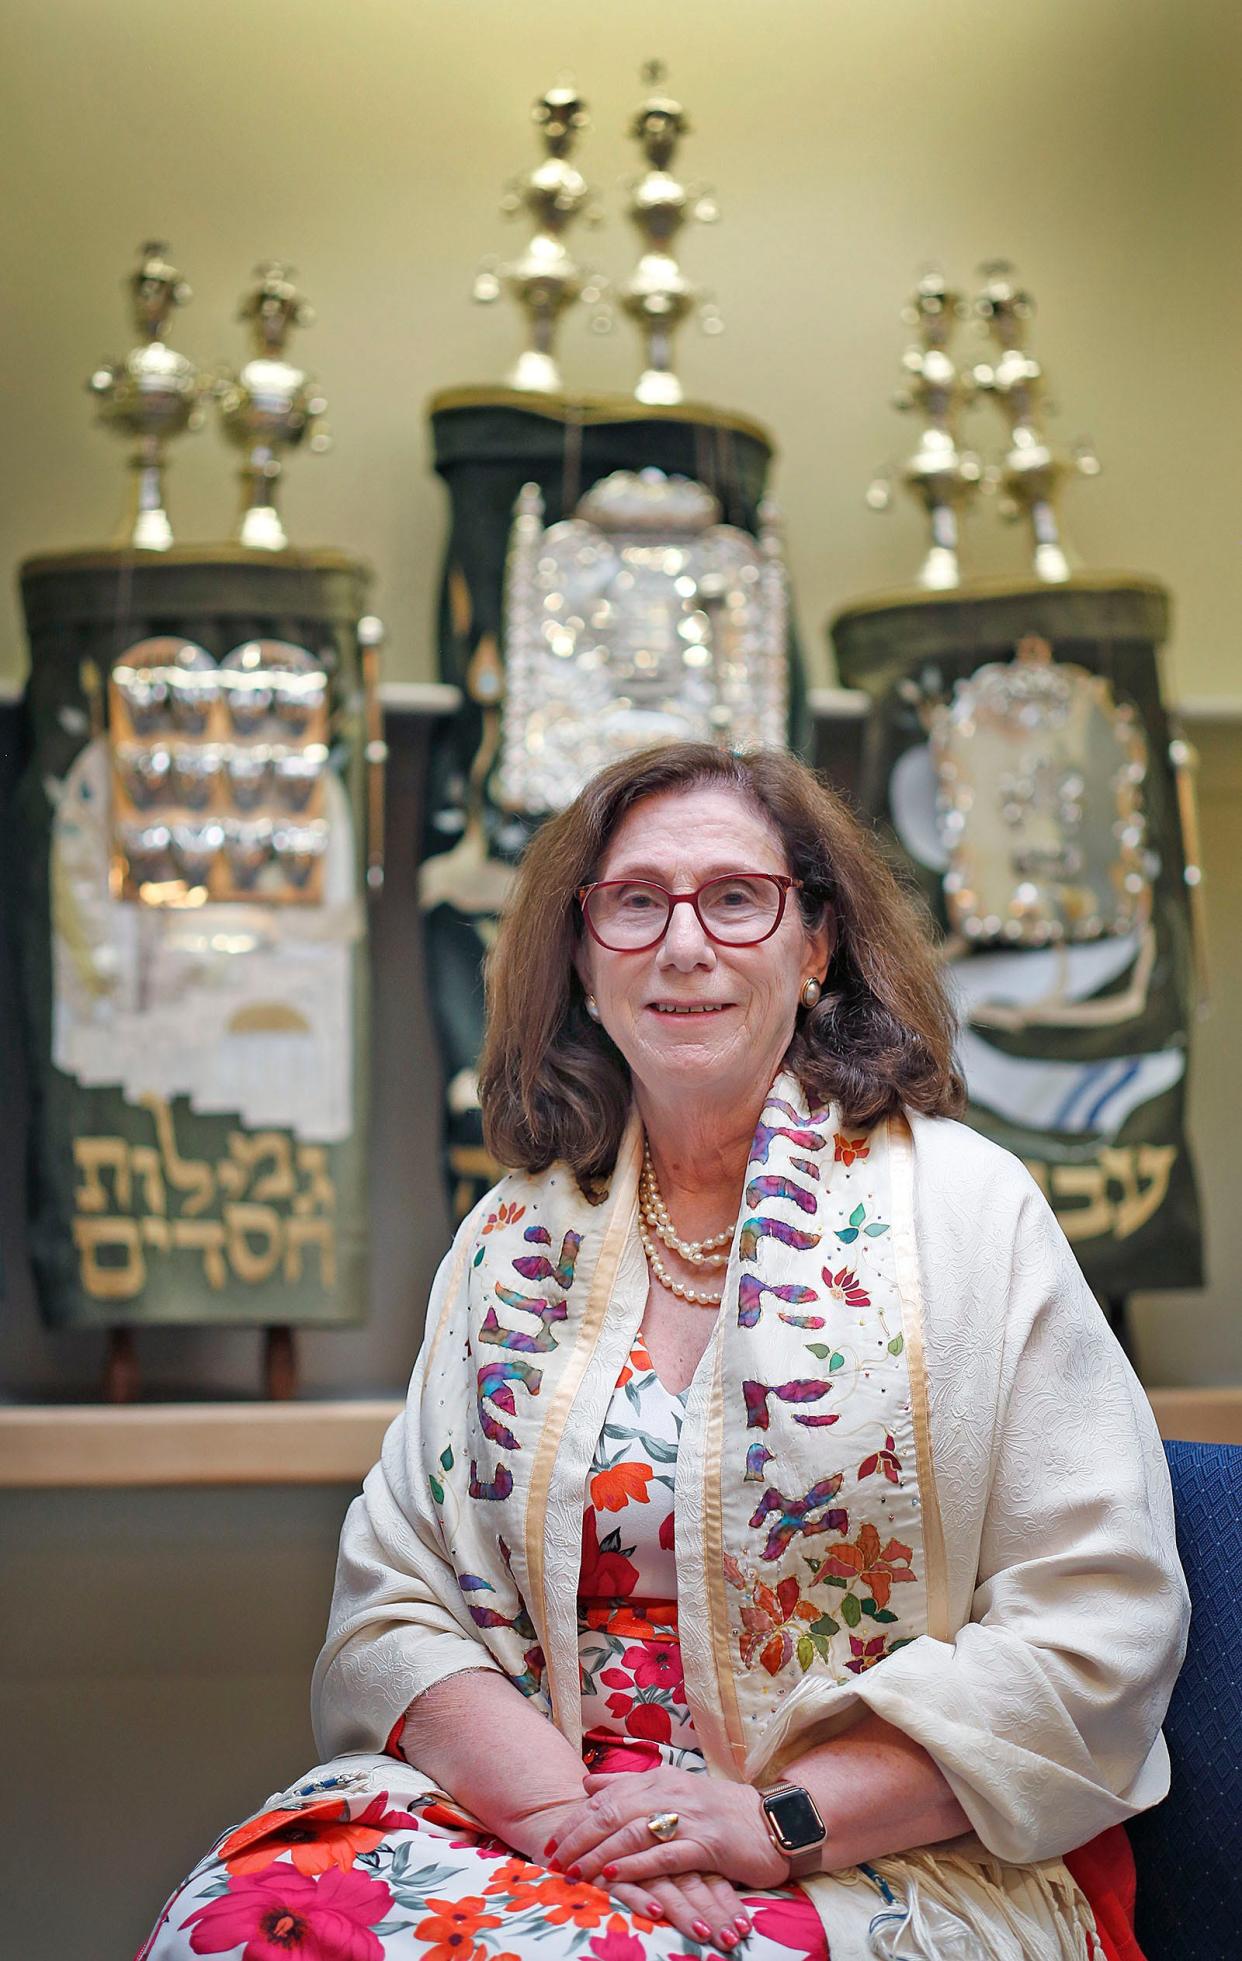 Rabbi Shira Joseph is retiring from leading Congregation Sha'aray Shalom in Hingham after 19 years, Thursday, May 12, 2022.